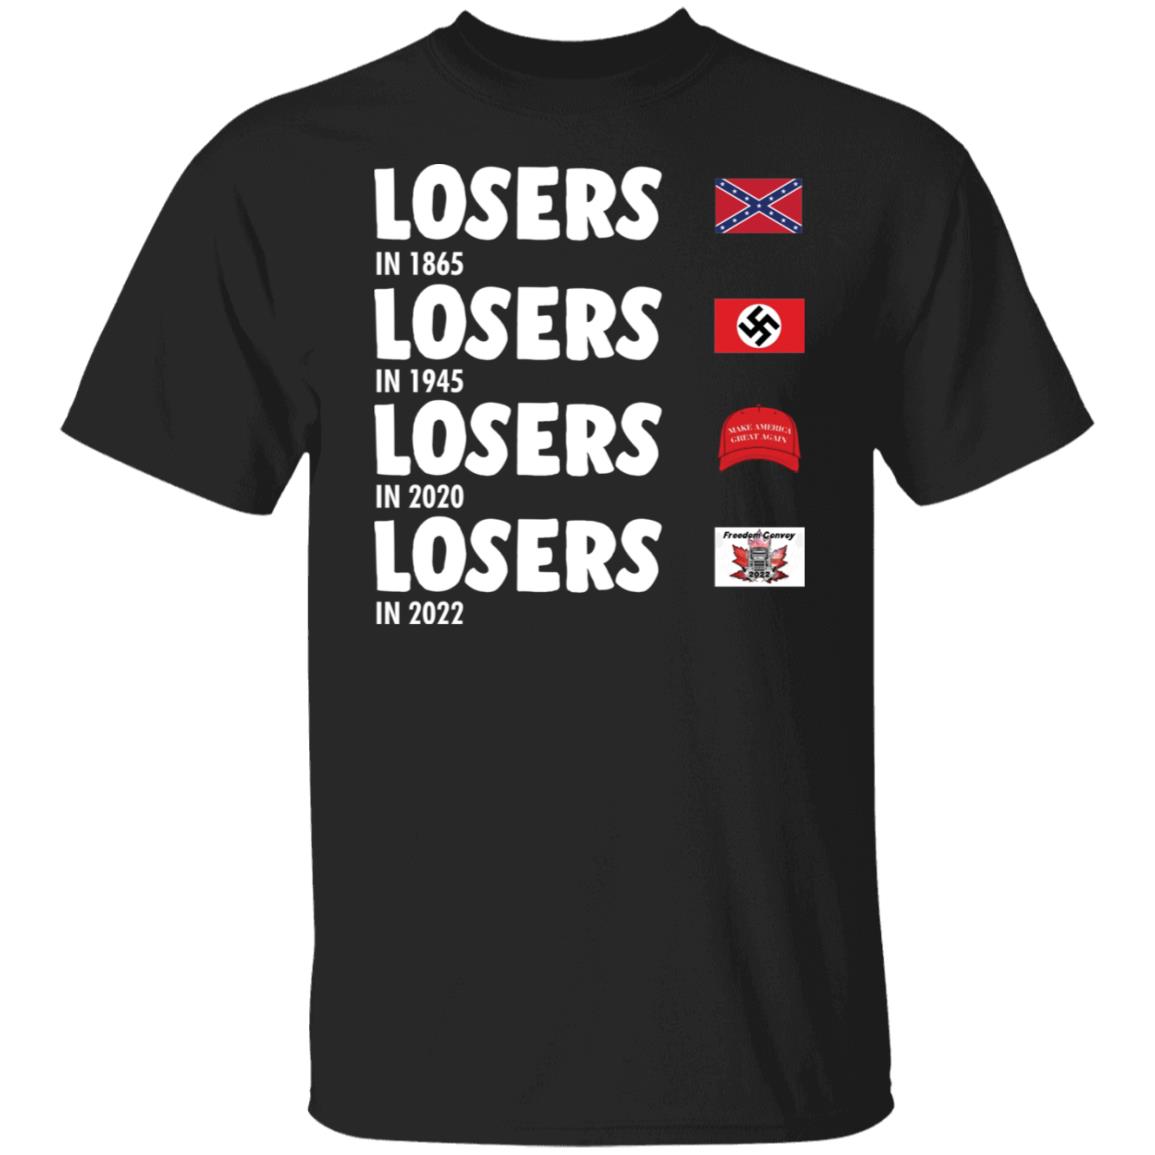 Losers In 1865 Losers In 1945 Losers In 2020 shirt